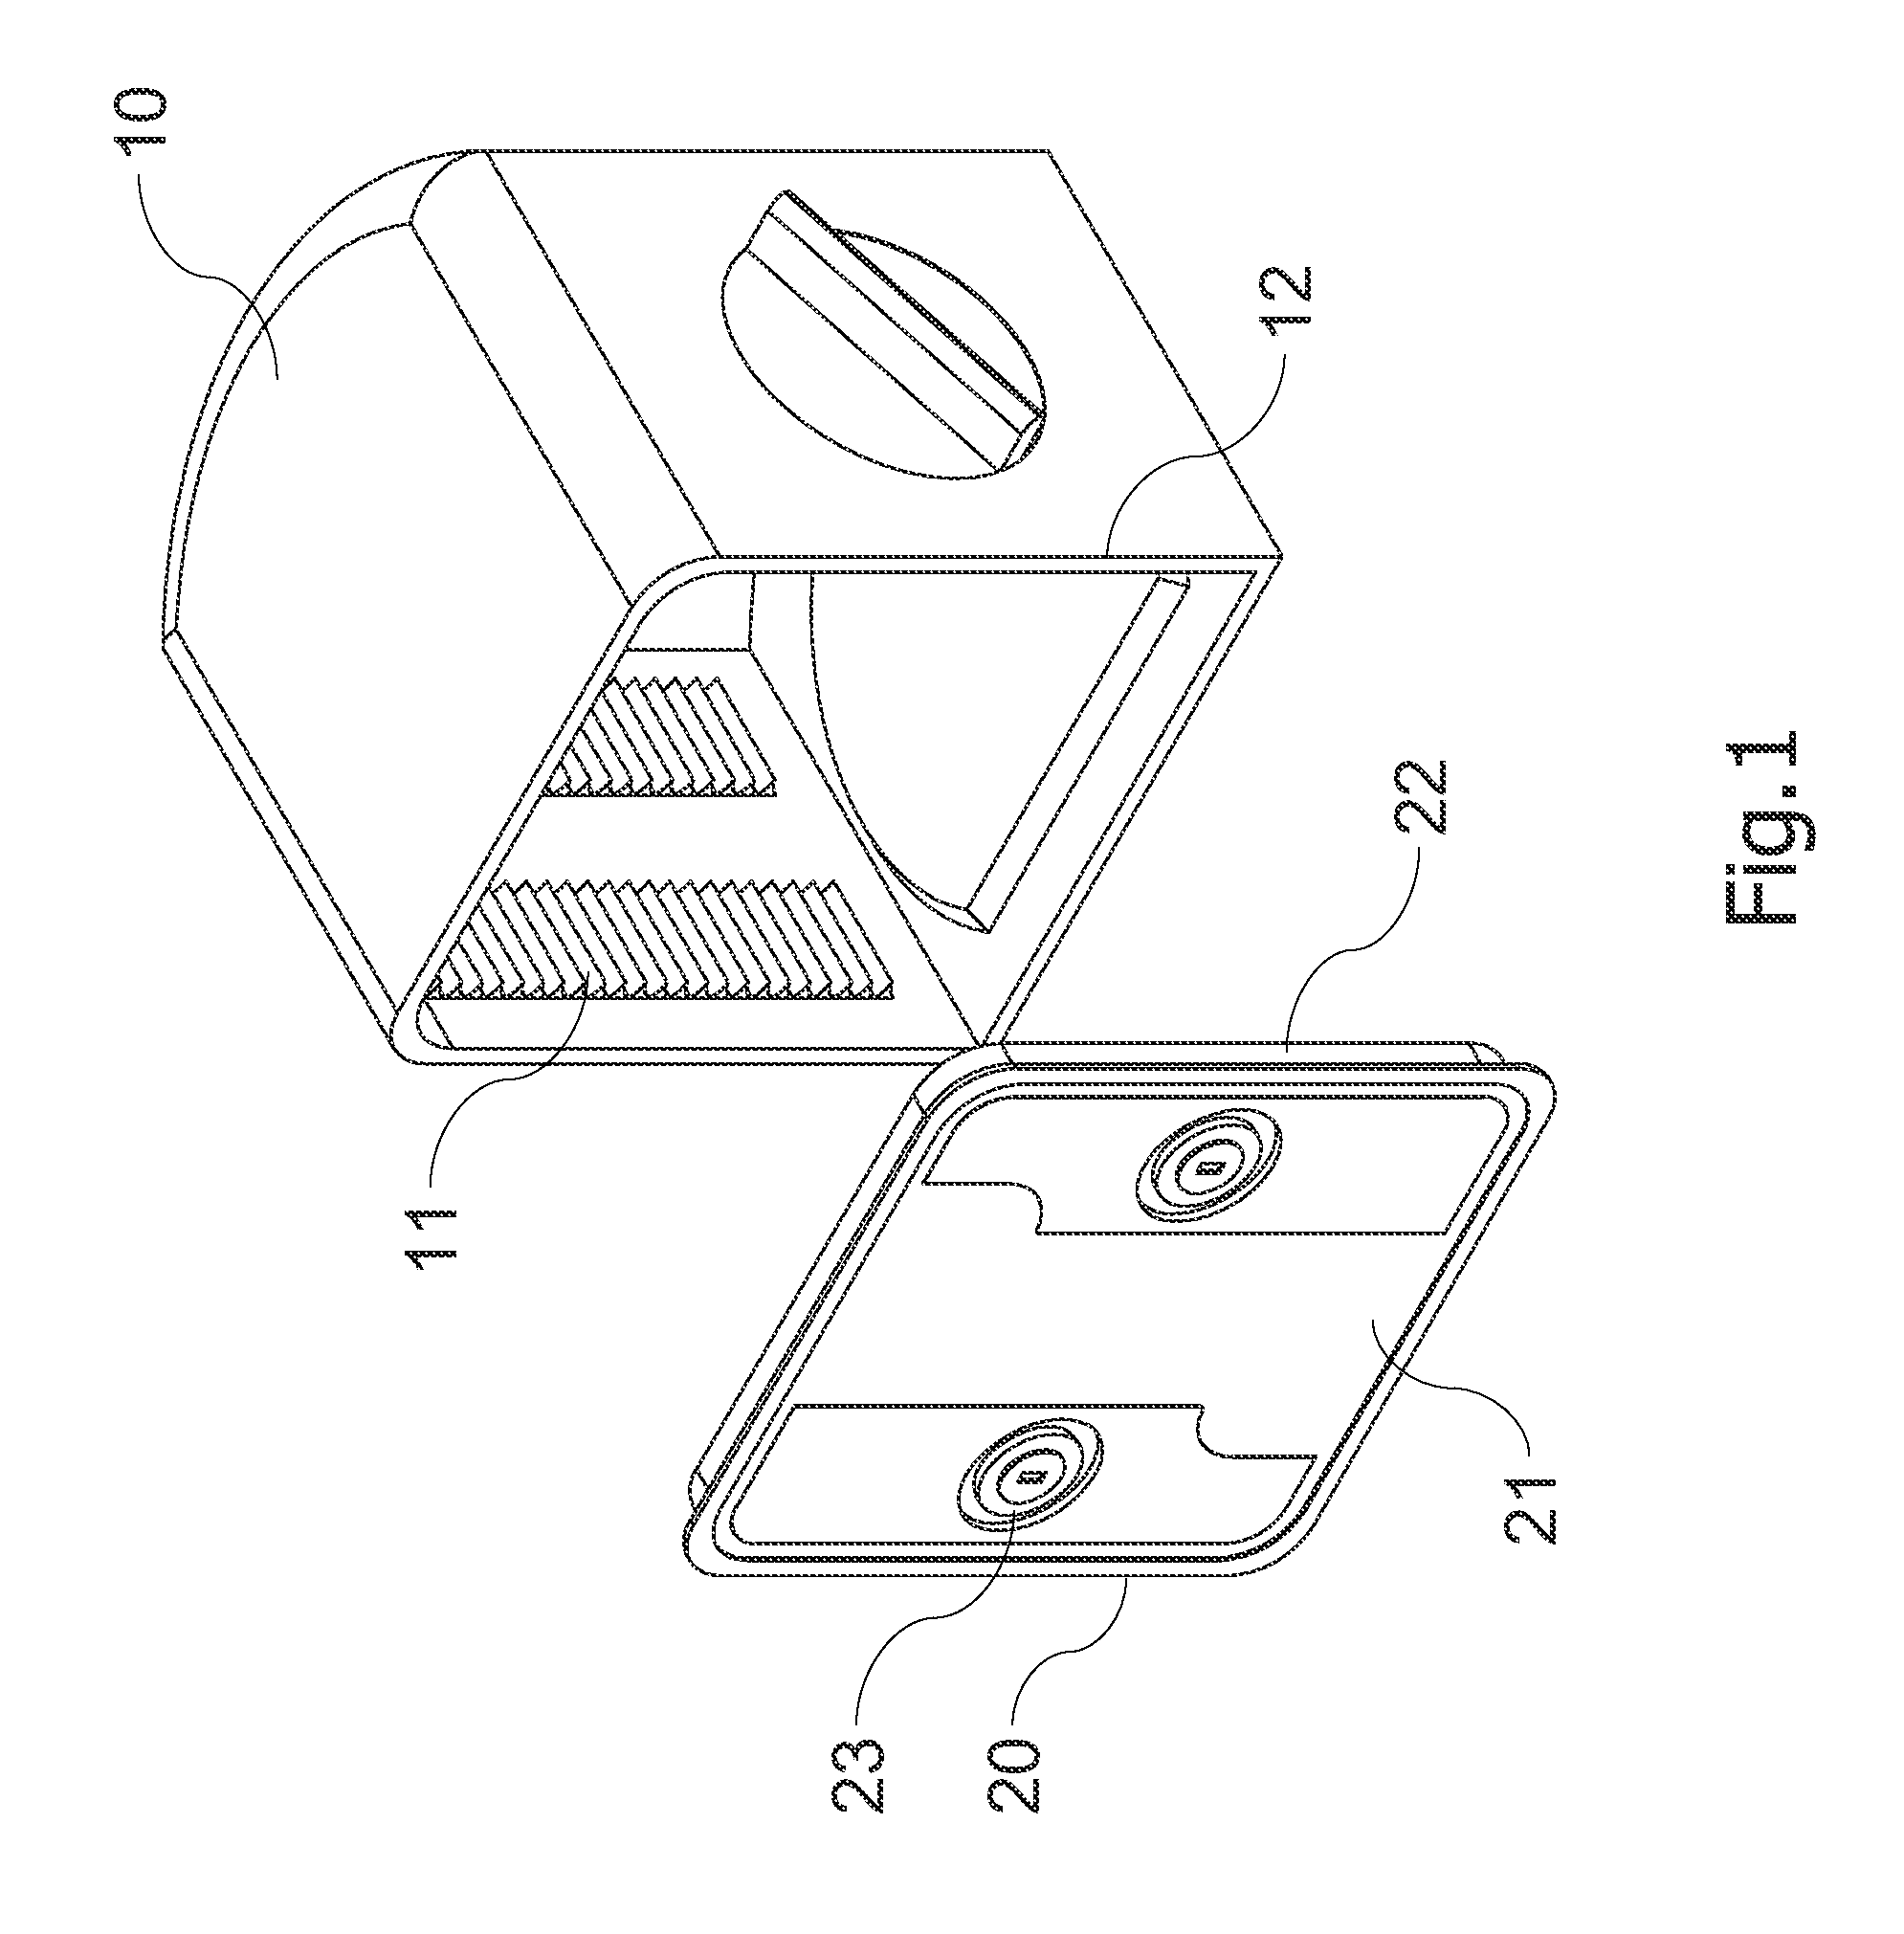 Wafer container with elasticity module